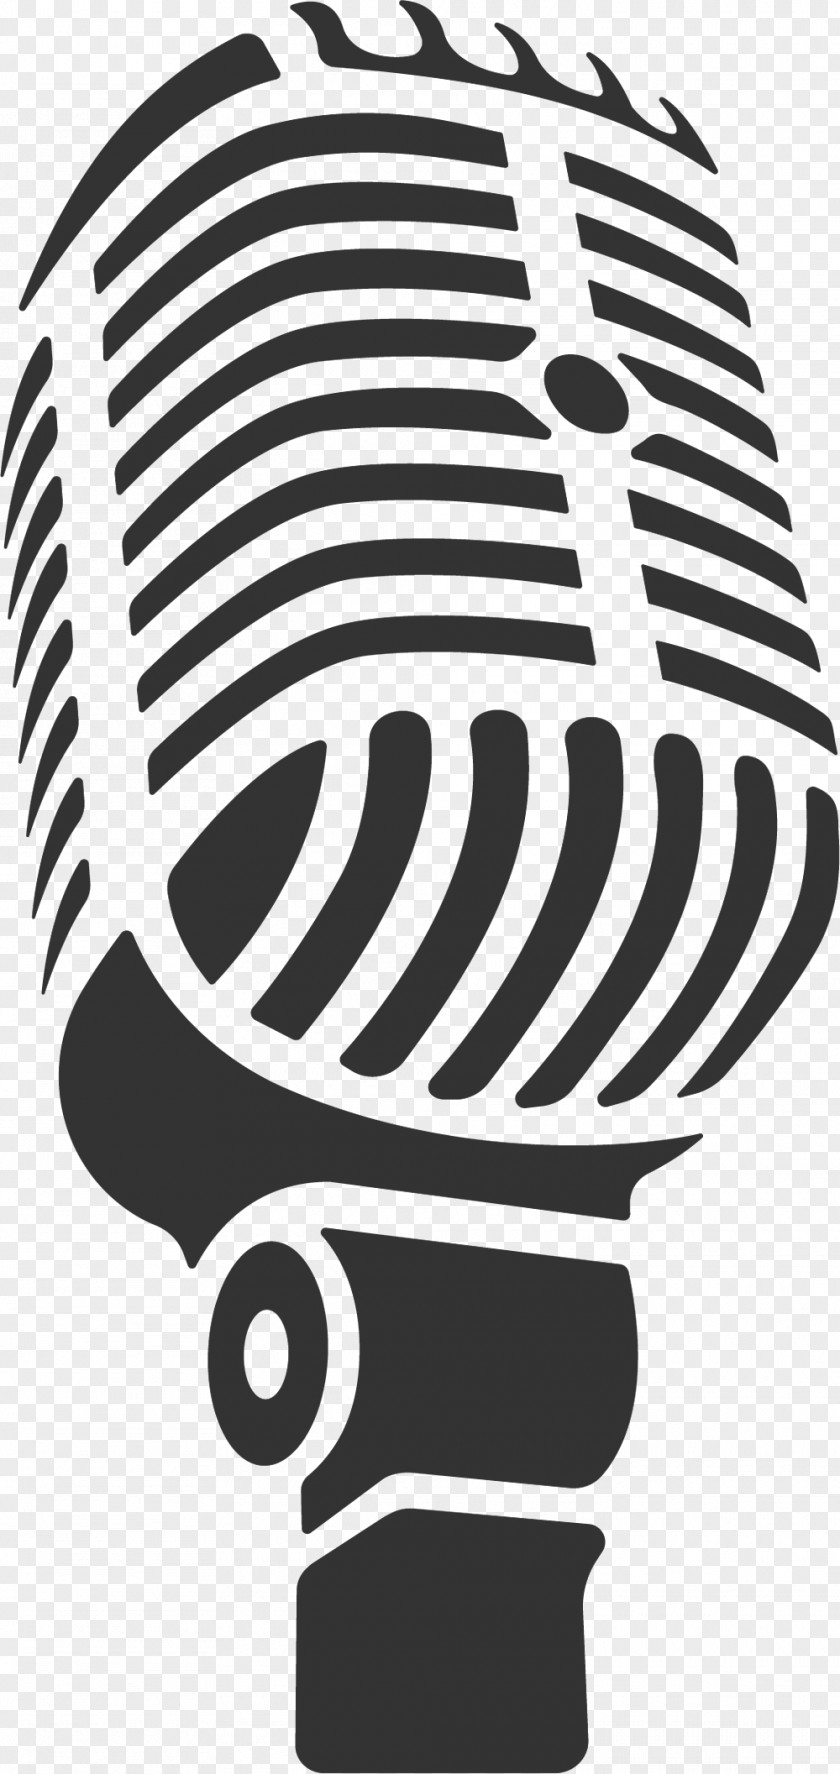 Recording Studio Microphone Sound And Reproduction Clip Art PNG